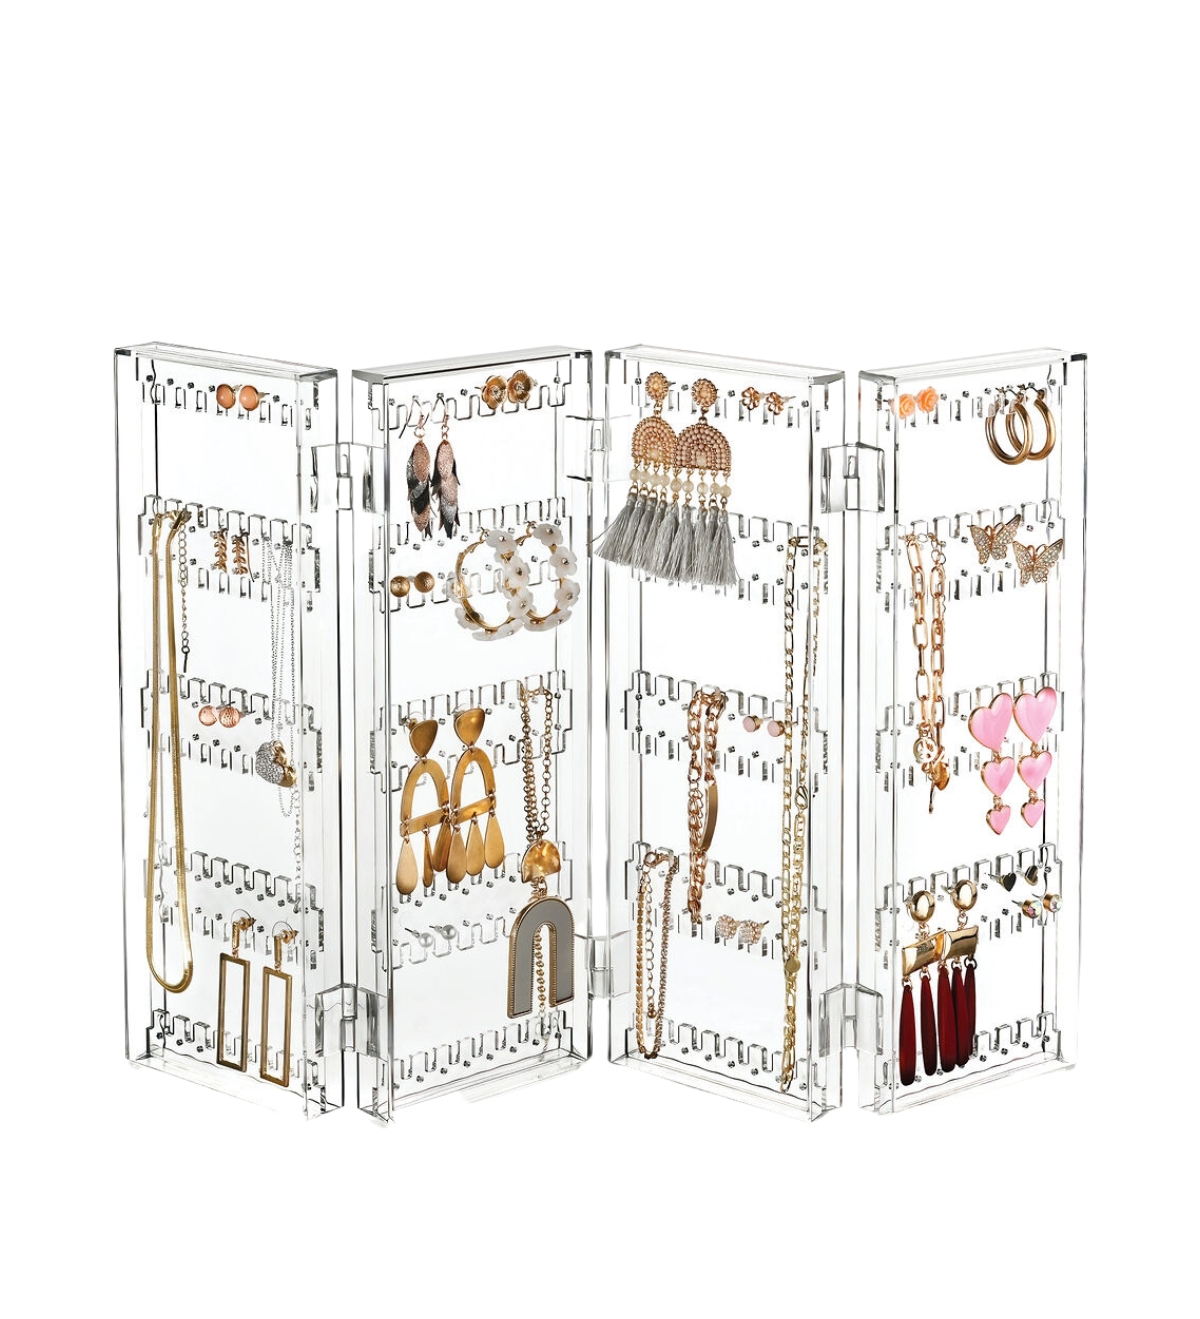 Jewelry Organizer - 5-Tier Earring Holder Rack For 128 Pairs - Compact Stand For Jewelry - Clear Acrylic Necklace Holder - Foldable & Freestanding Tab